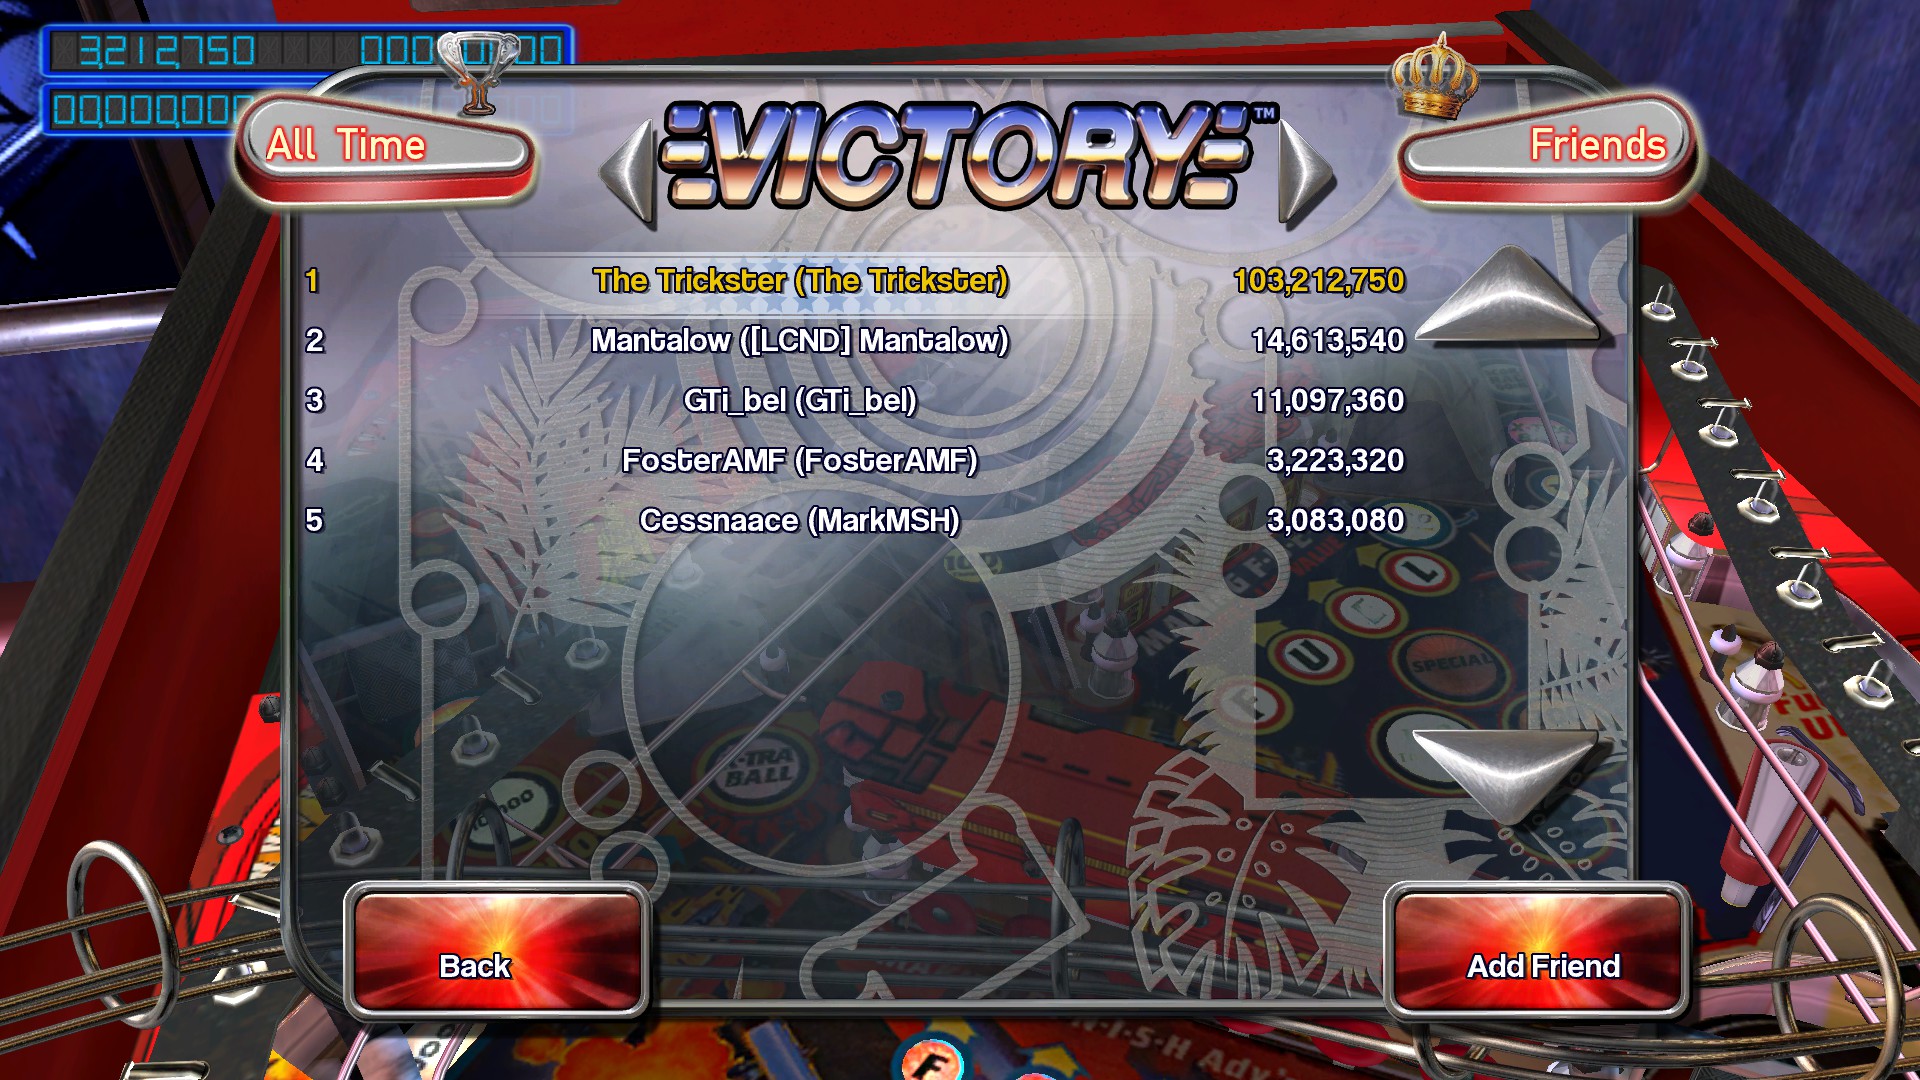 TheTrickster: Pinball Arcade: Victory (PC) 103,212,750 points on 2016-02-27 17:59:26